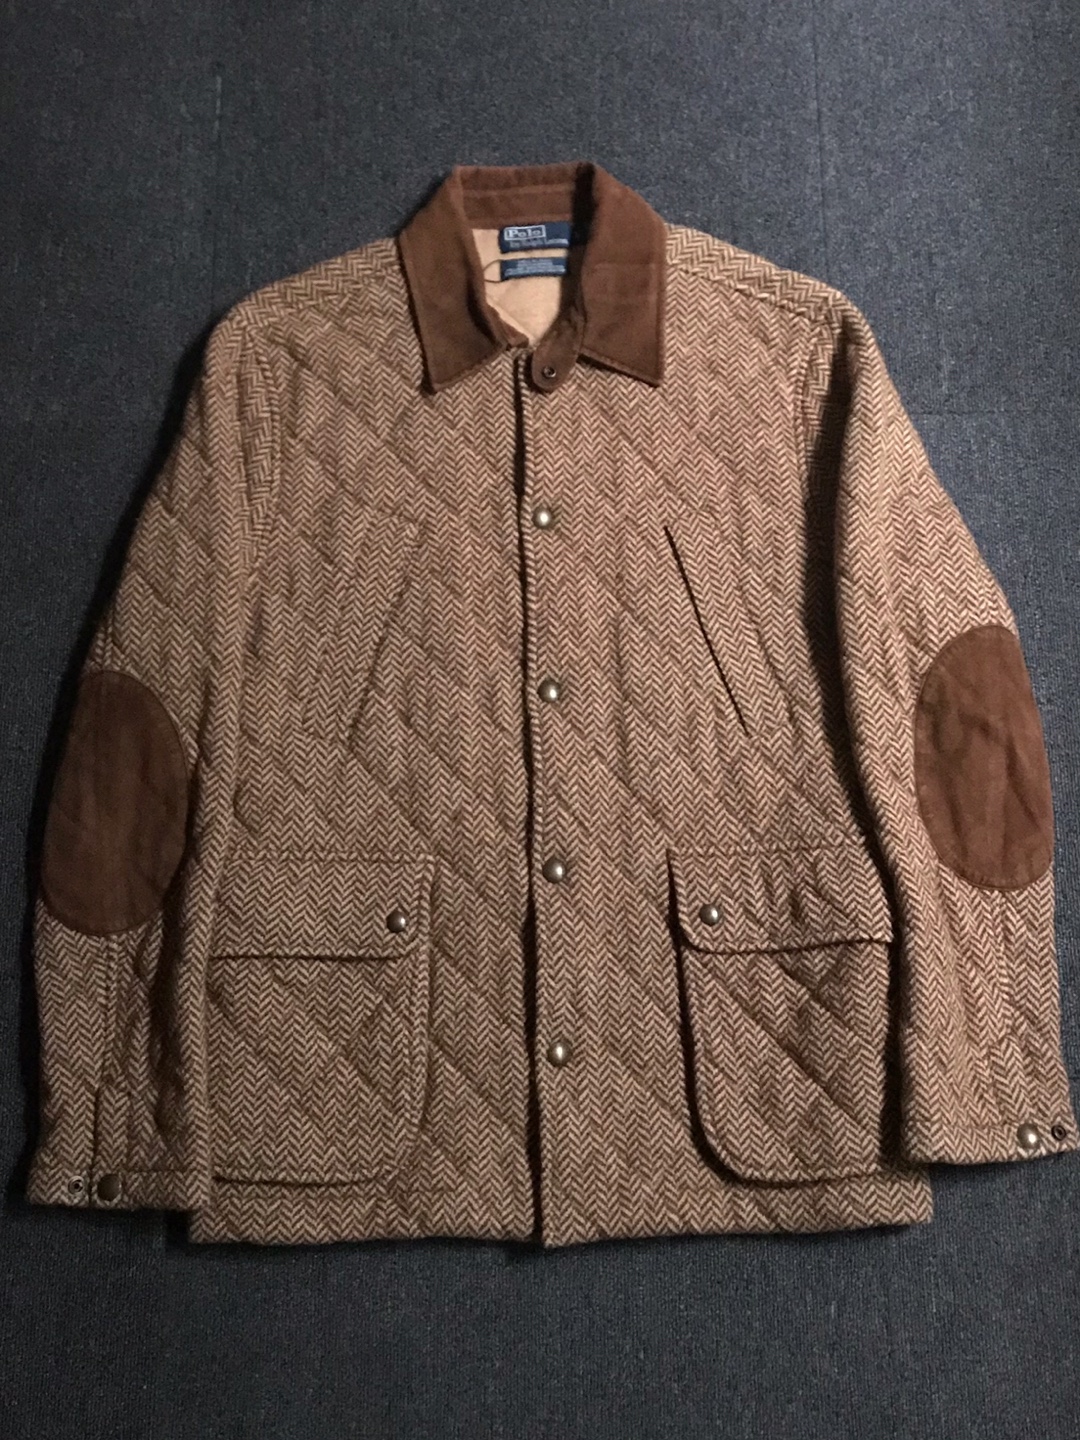 Polo RL cashmere100 herringbone quilted lining jacket (L size, ~105 추천)